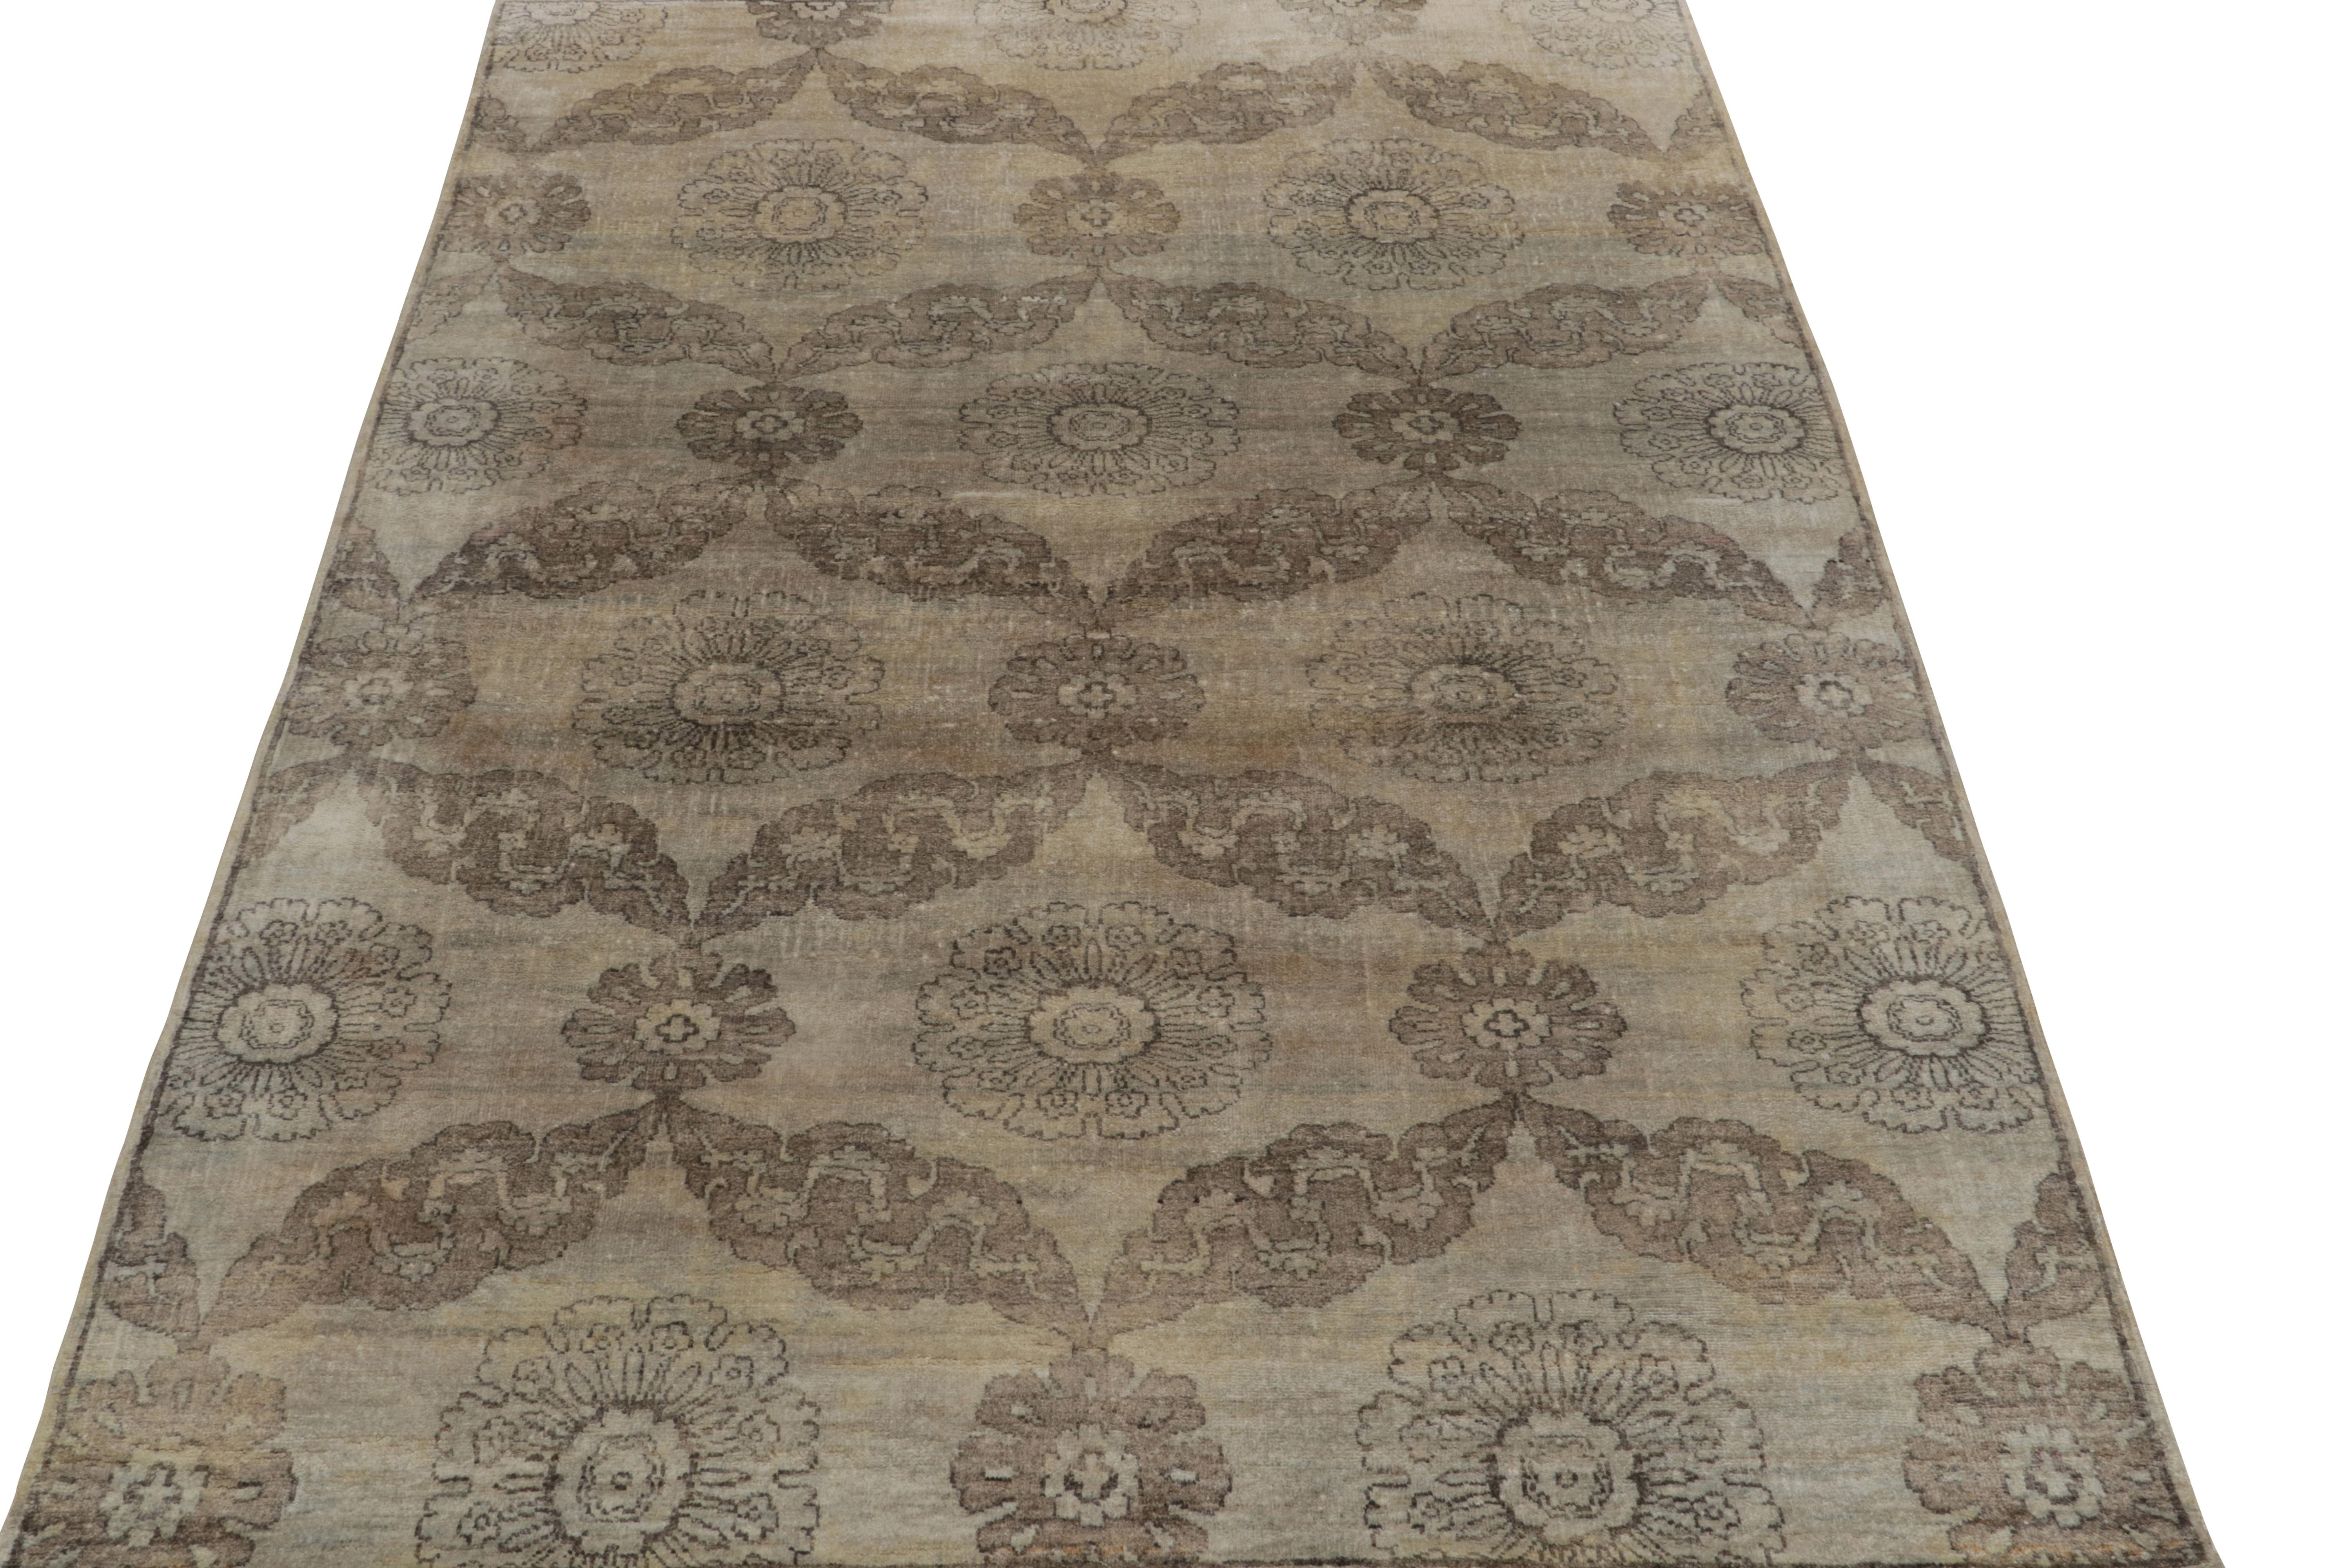 Indian Rug & Kilim’s Classic Style Rug in Beige-Brown and Silver-Gray Floral Patterns For Sale